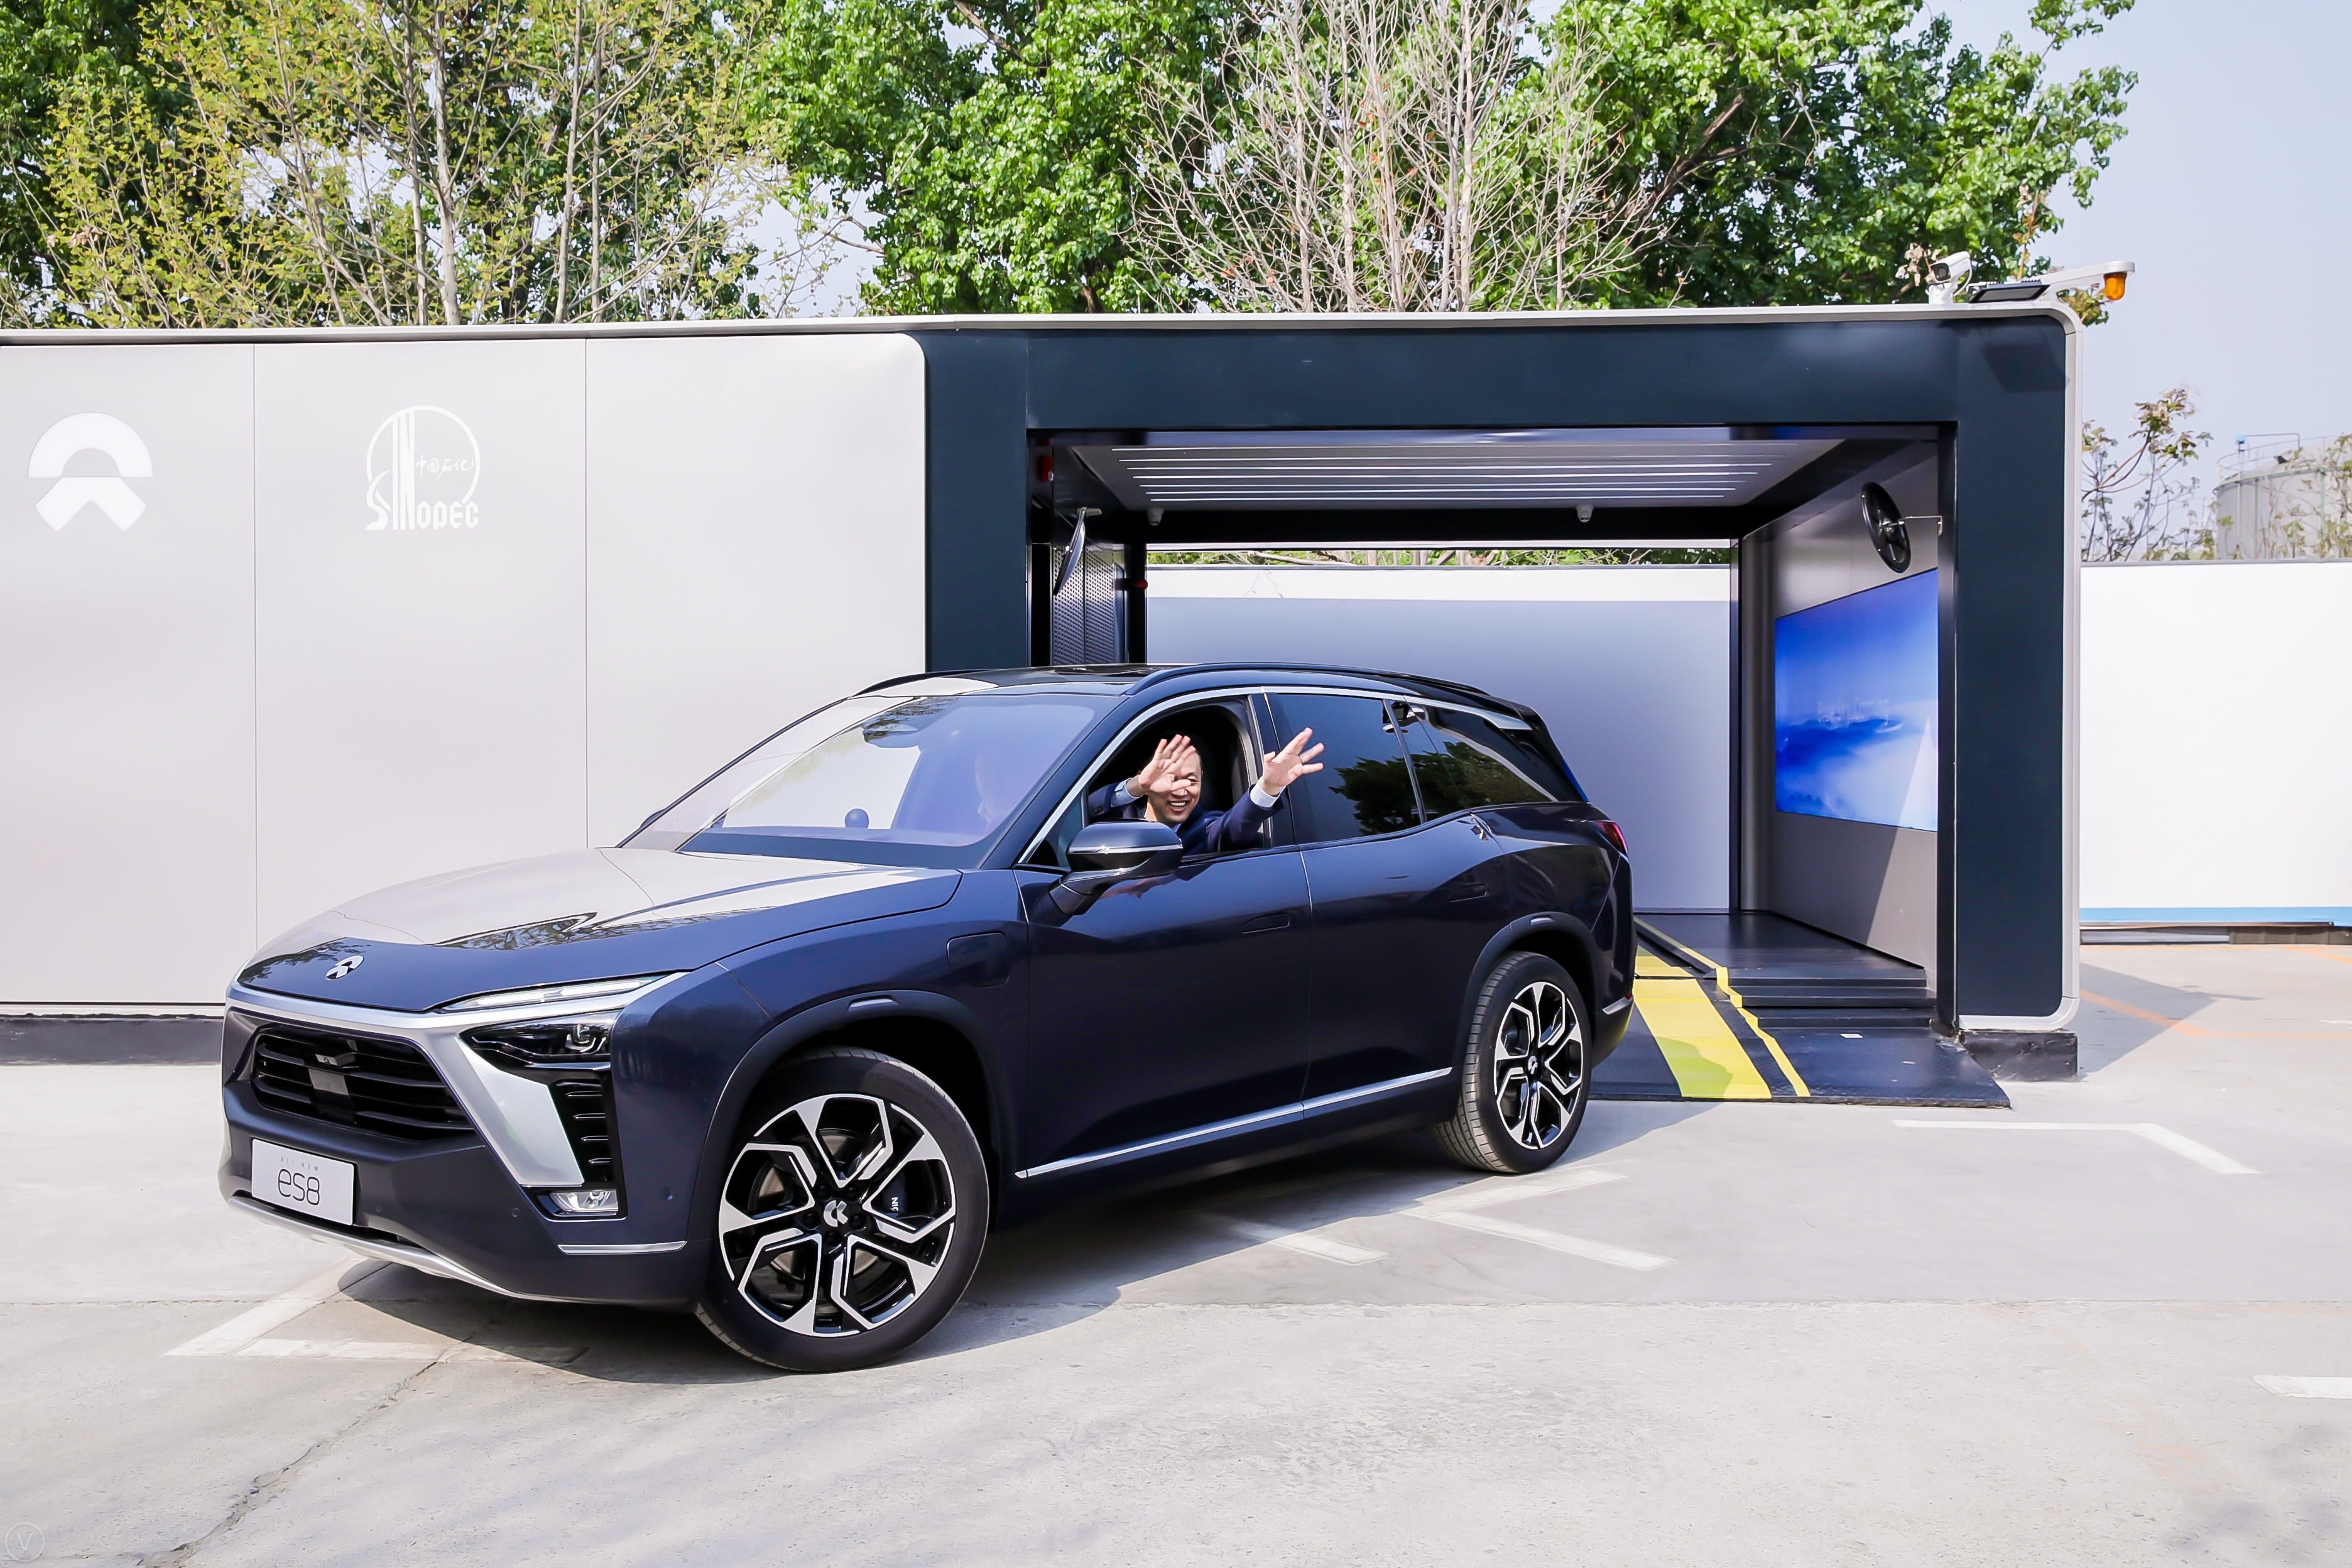 Nio-Sinopec Partnership Launches With Power Swap Station 2.0: What EV Investors Need To Know